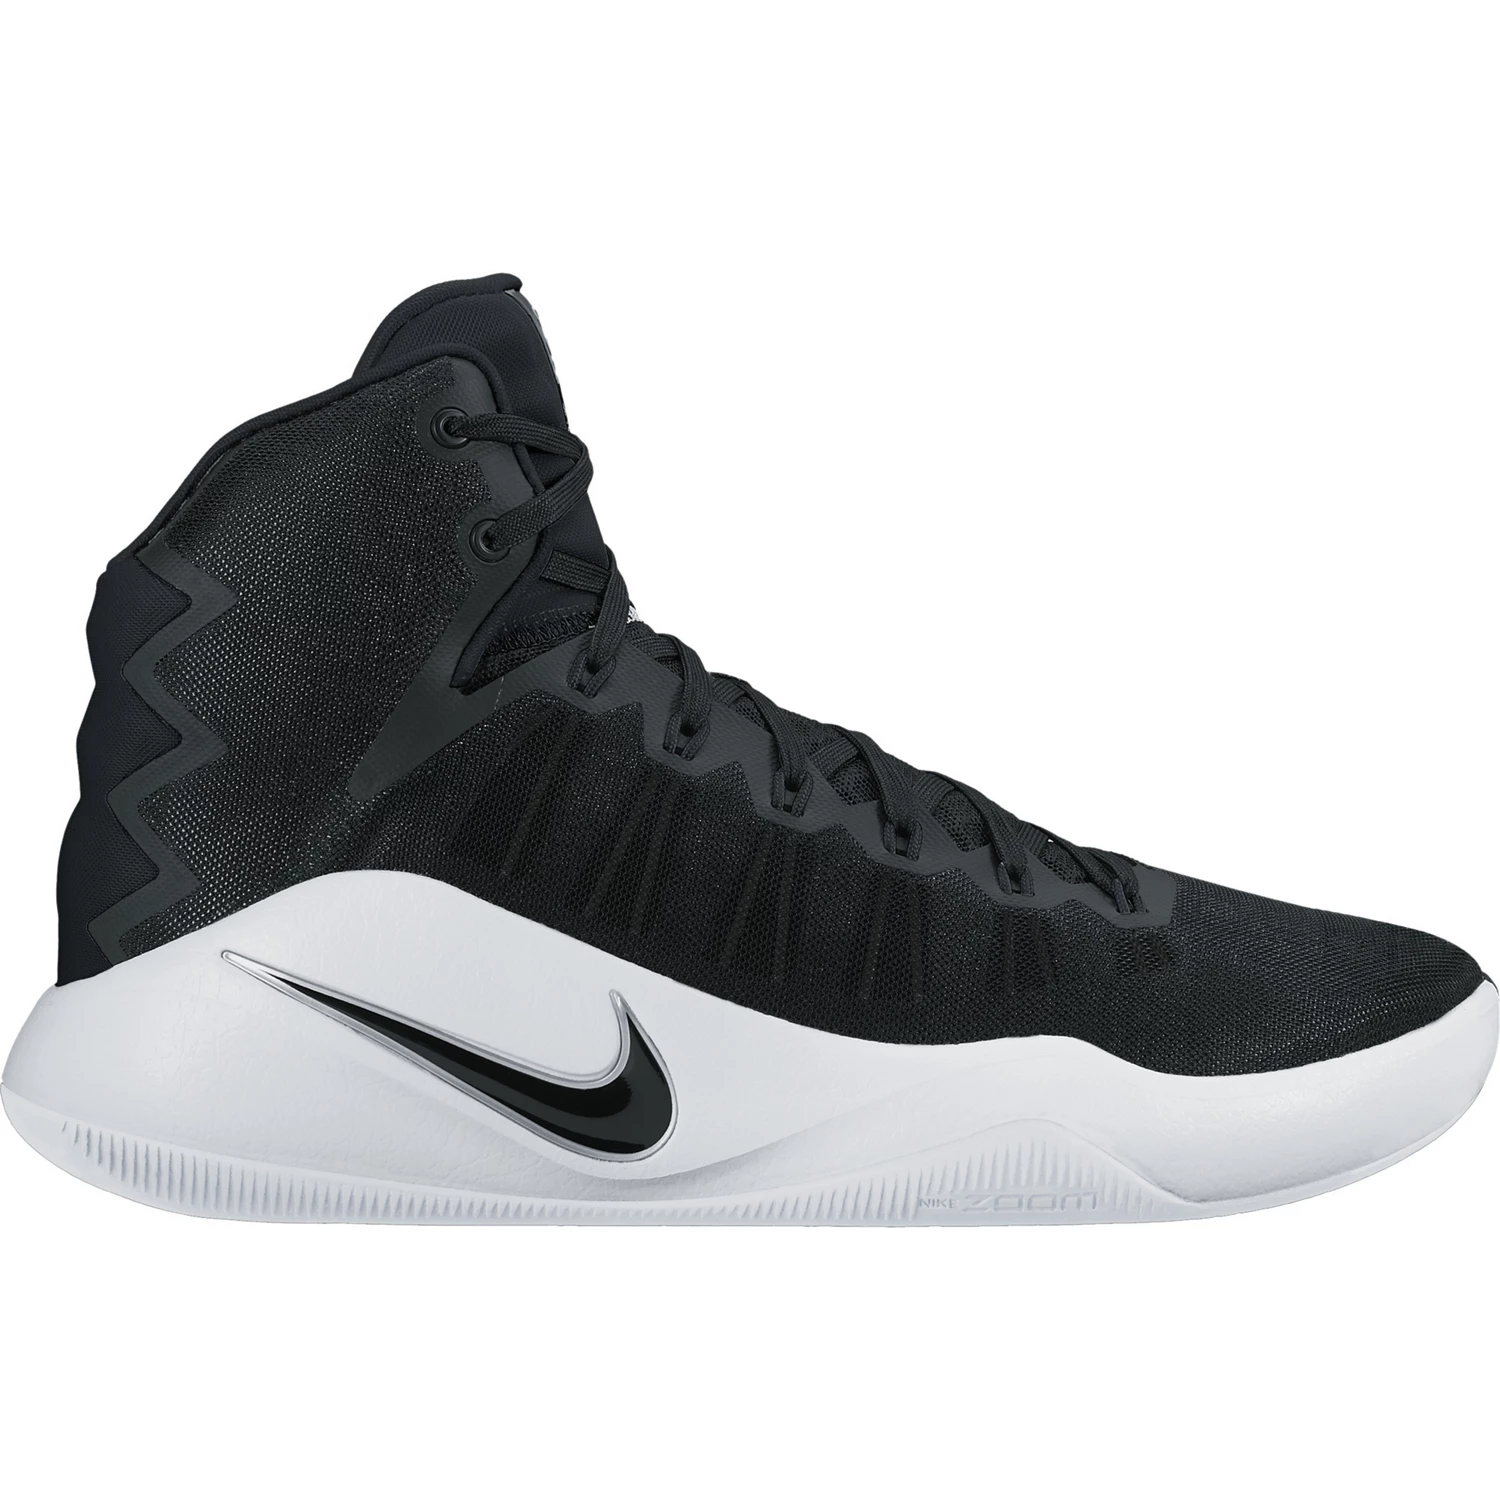 basketball shoes under 60 dollars